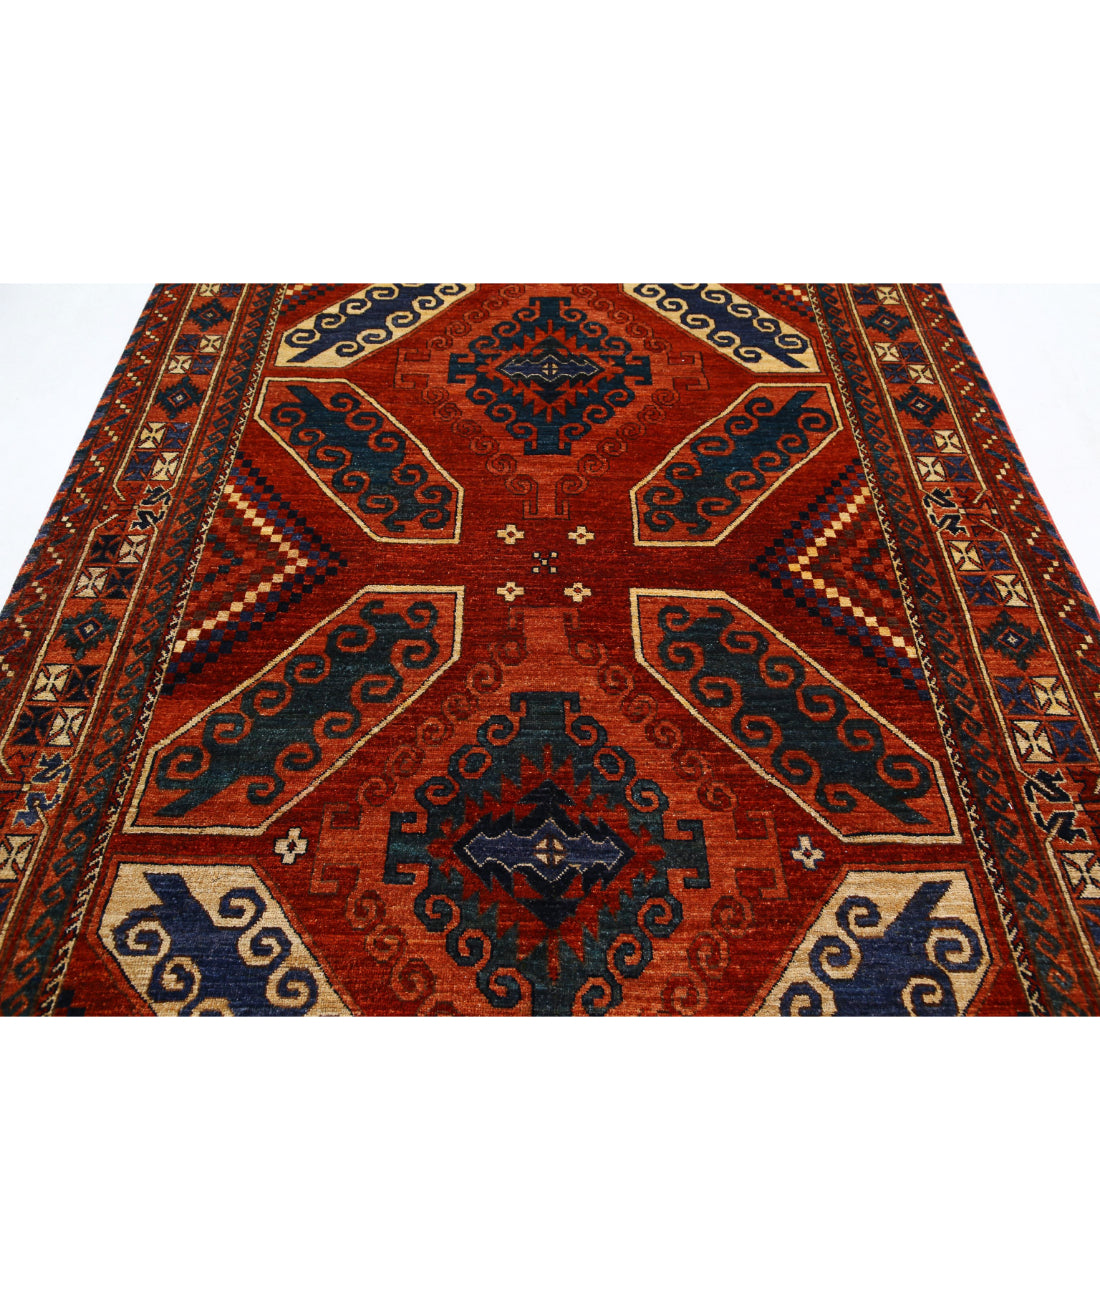 Hand Knotted Nomadic Caucasian Humna Wool Rug - 6'5'' x 9'4'' 6'5'' x 9'4'' (193 X 280) / Red / Red